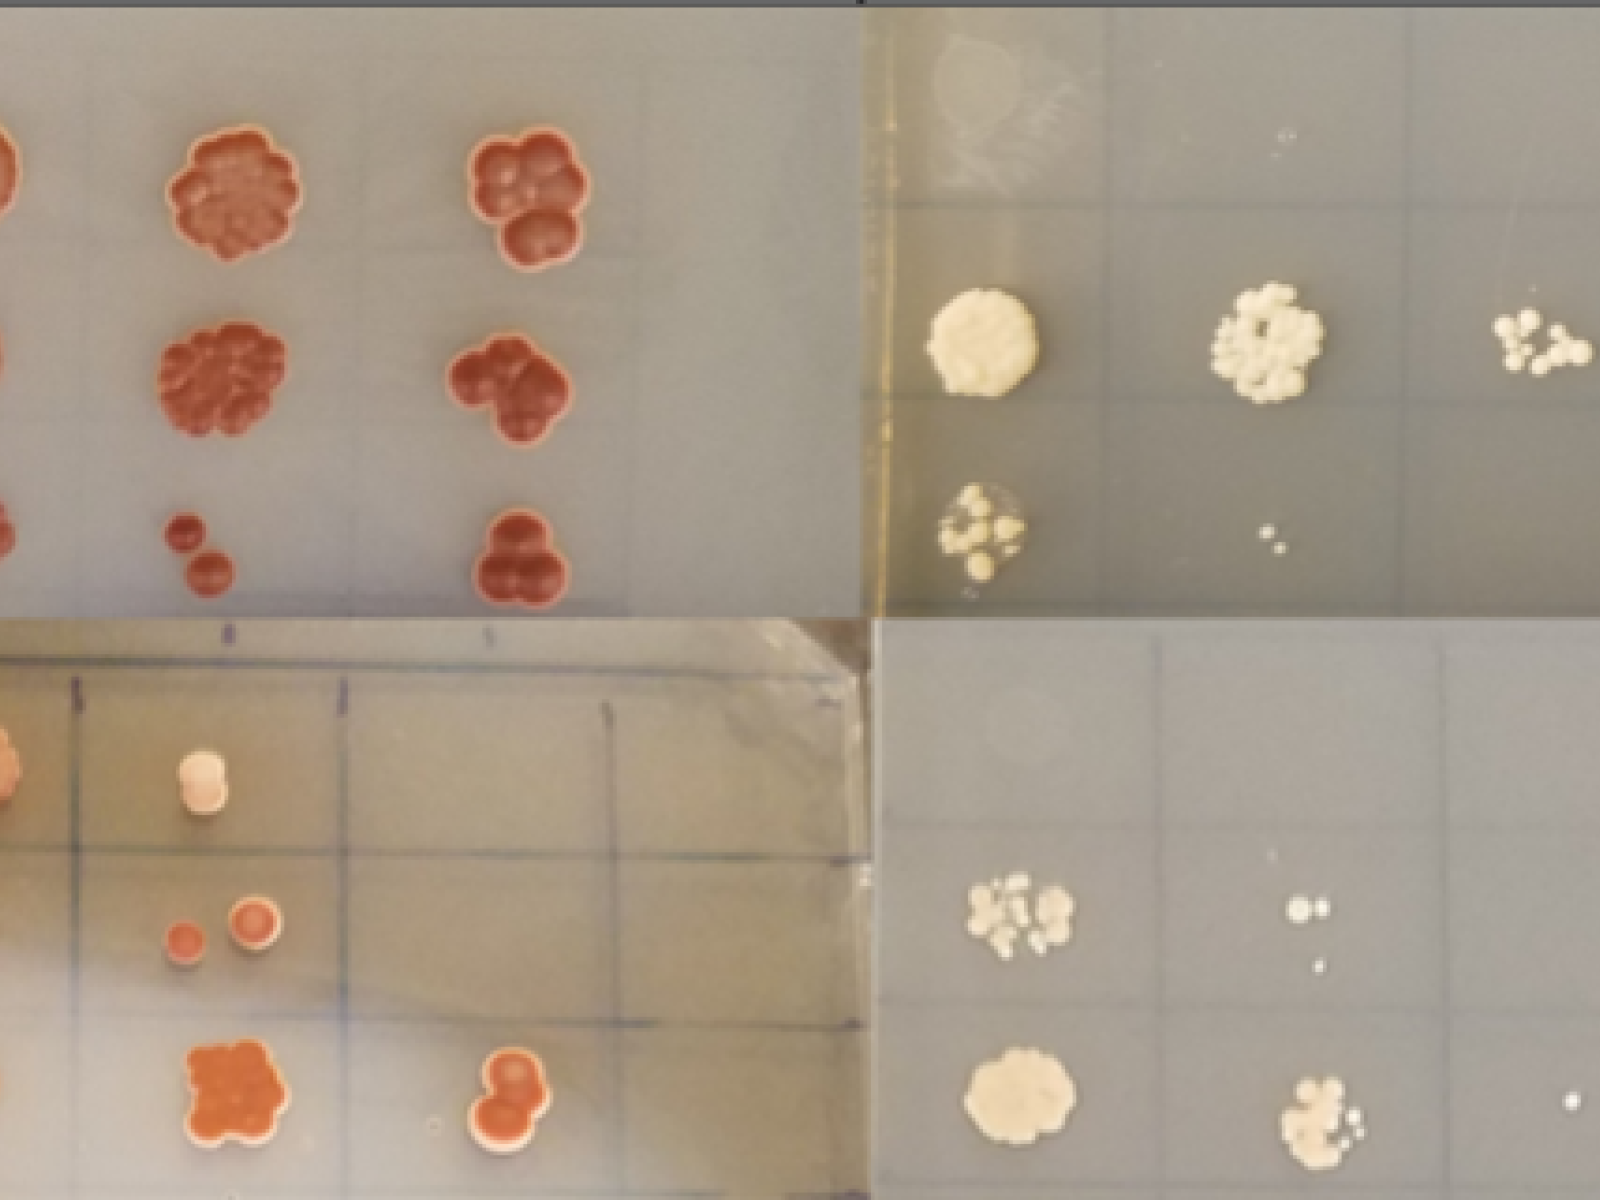 A yeast-2-hybrid experiment shows yeast growing on two selective media plates after mating